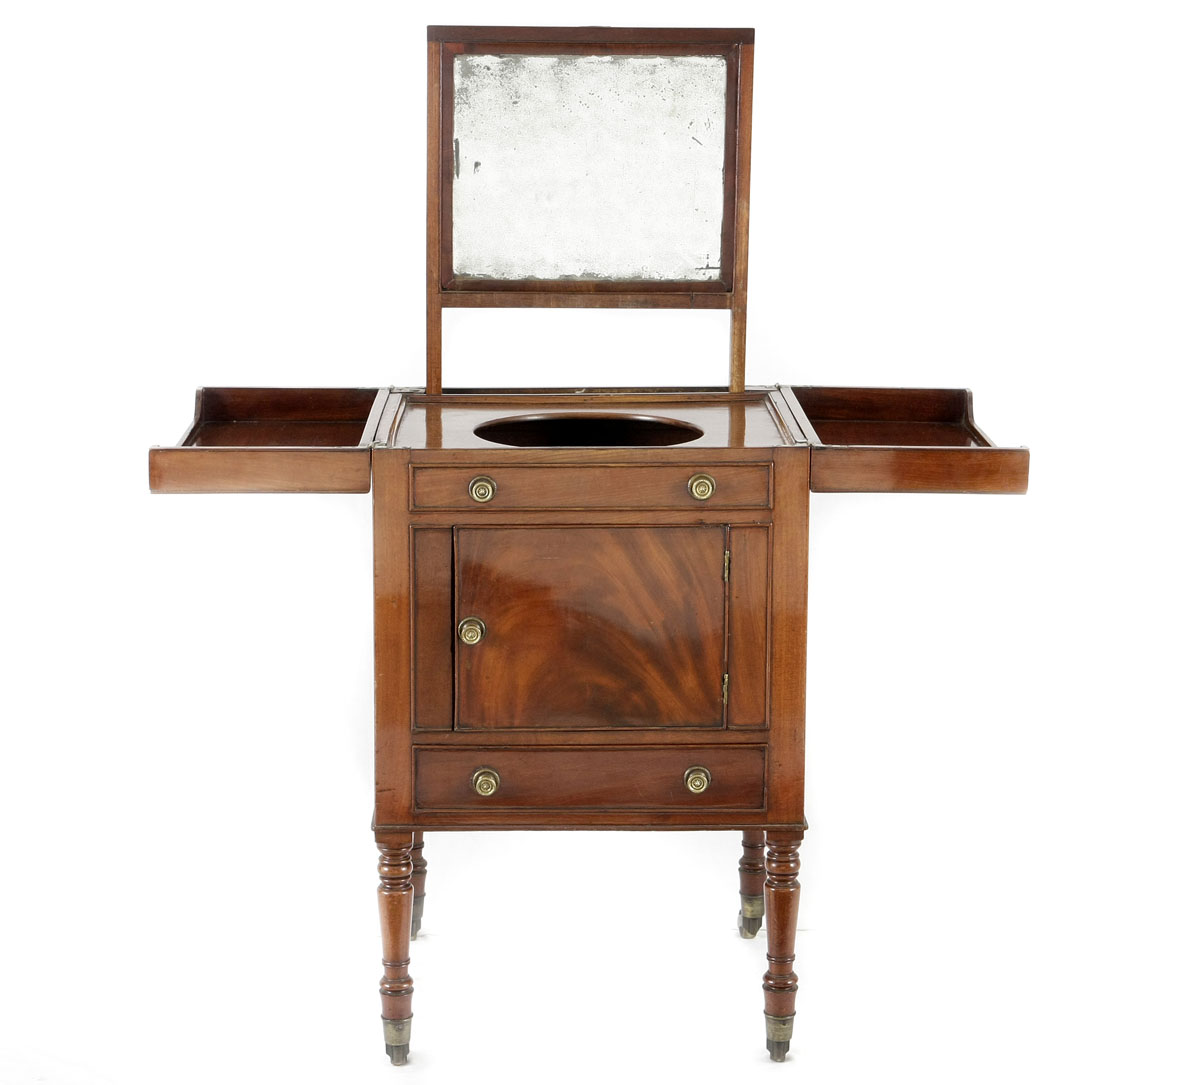 A Georgian mahogany campaign washstand, early 19th century the rectangular hinged top opening to